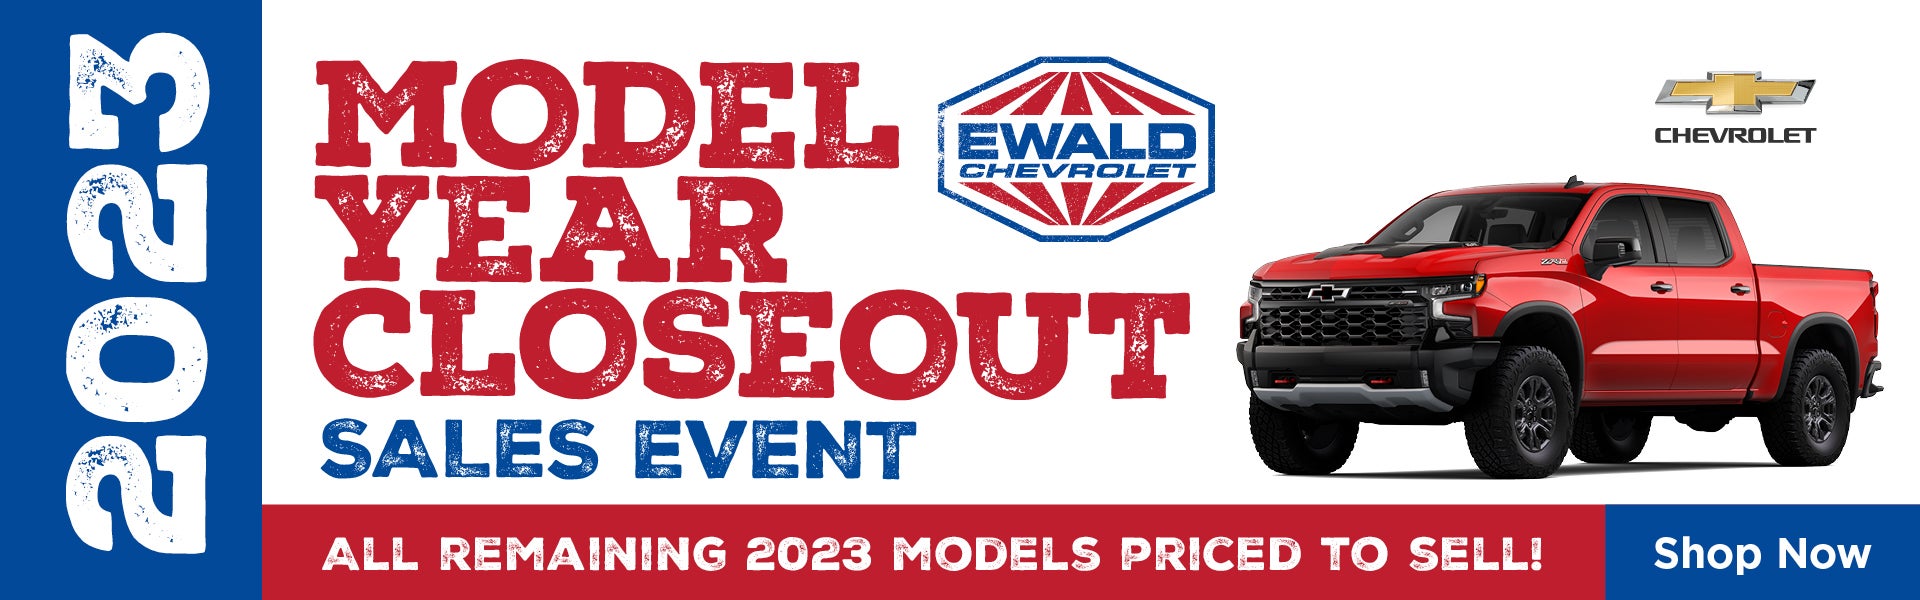 2023 Model Year Closeout Sales Event